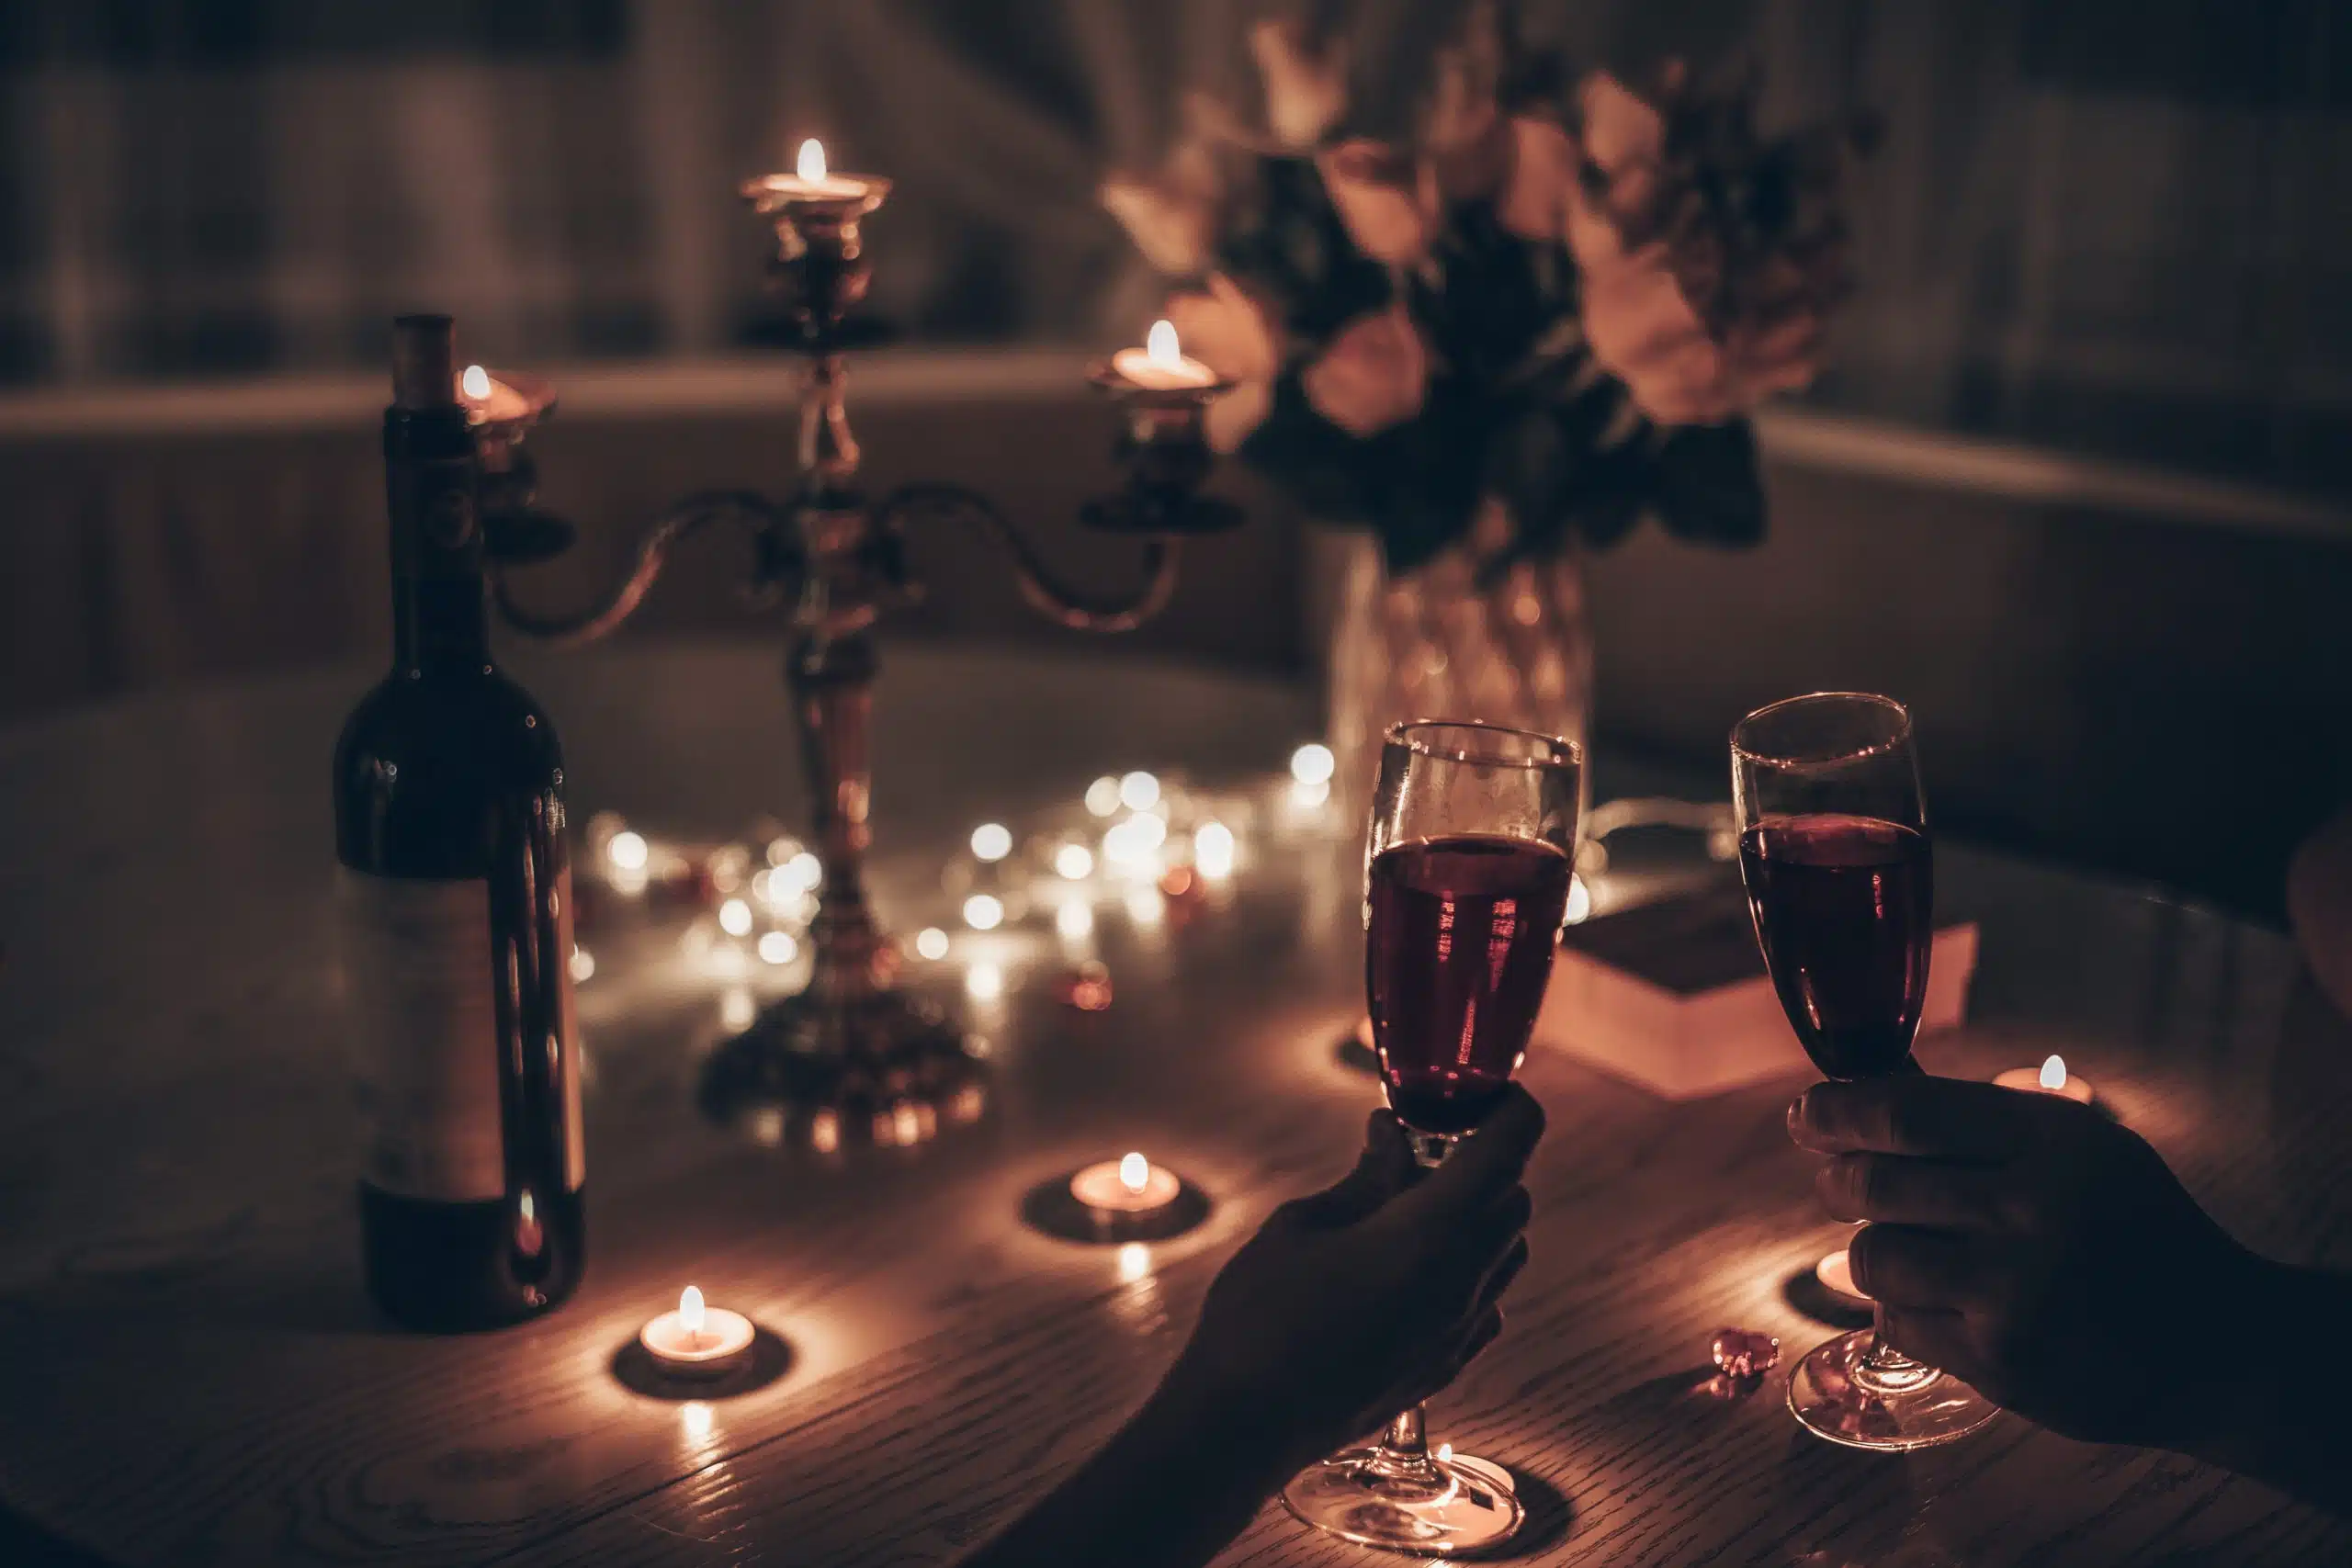 Hands man and woman holding glasses of wine having romantic candlelight dinner at table at home.